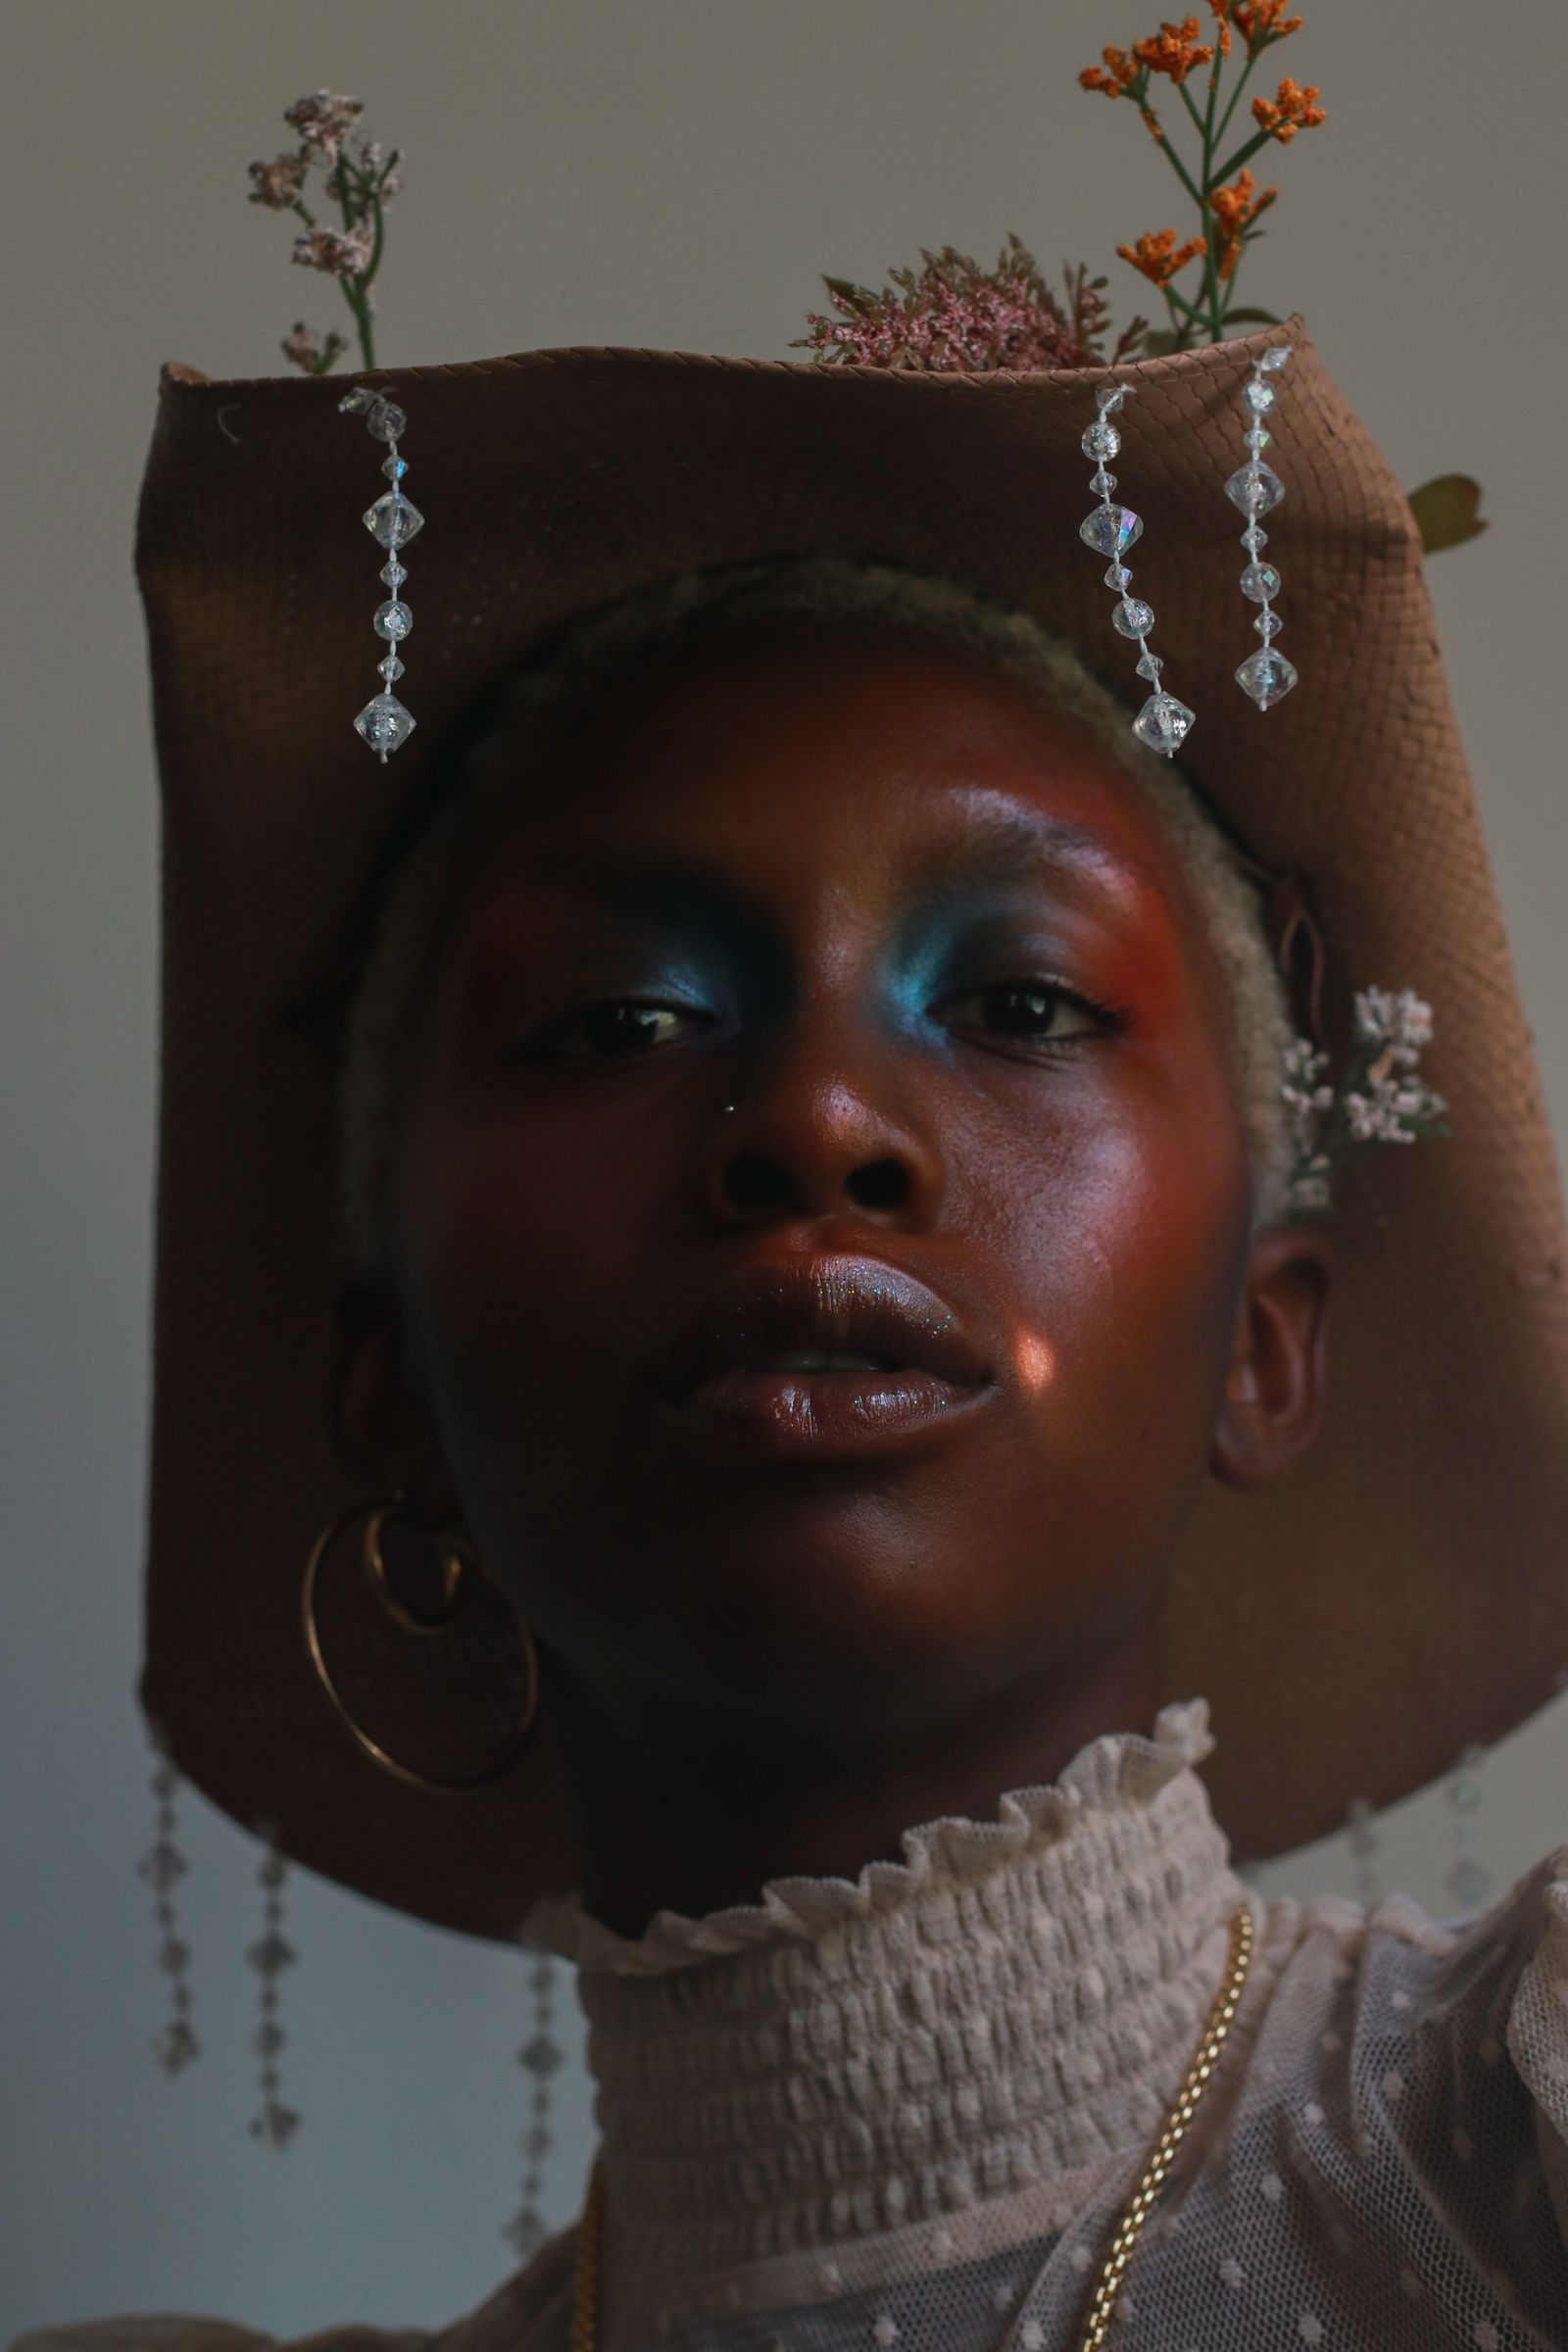 © Ozodi Onyeabor - Image from the "The Muses" photography project